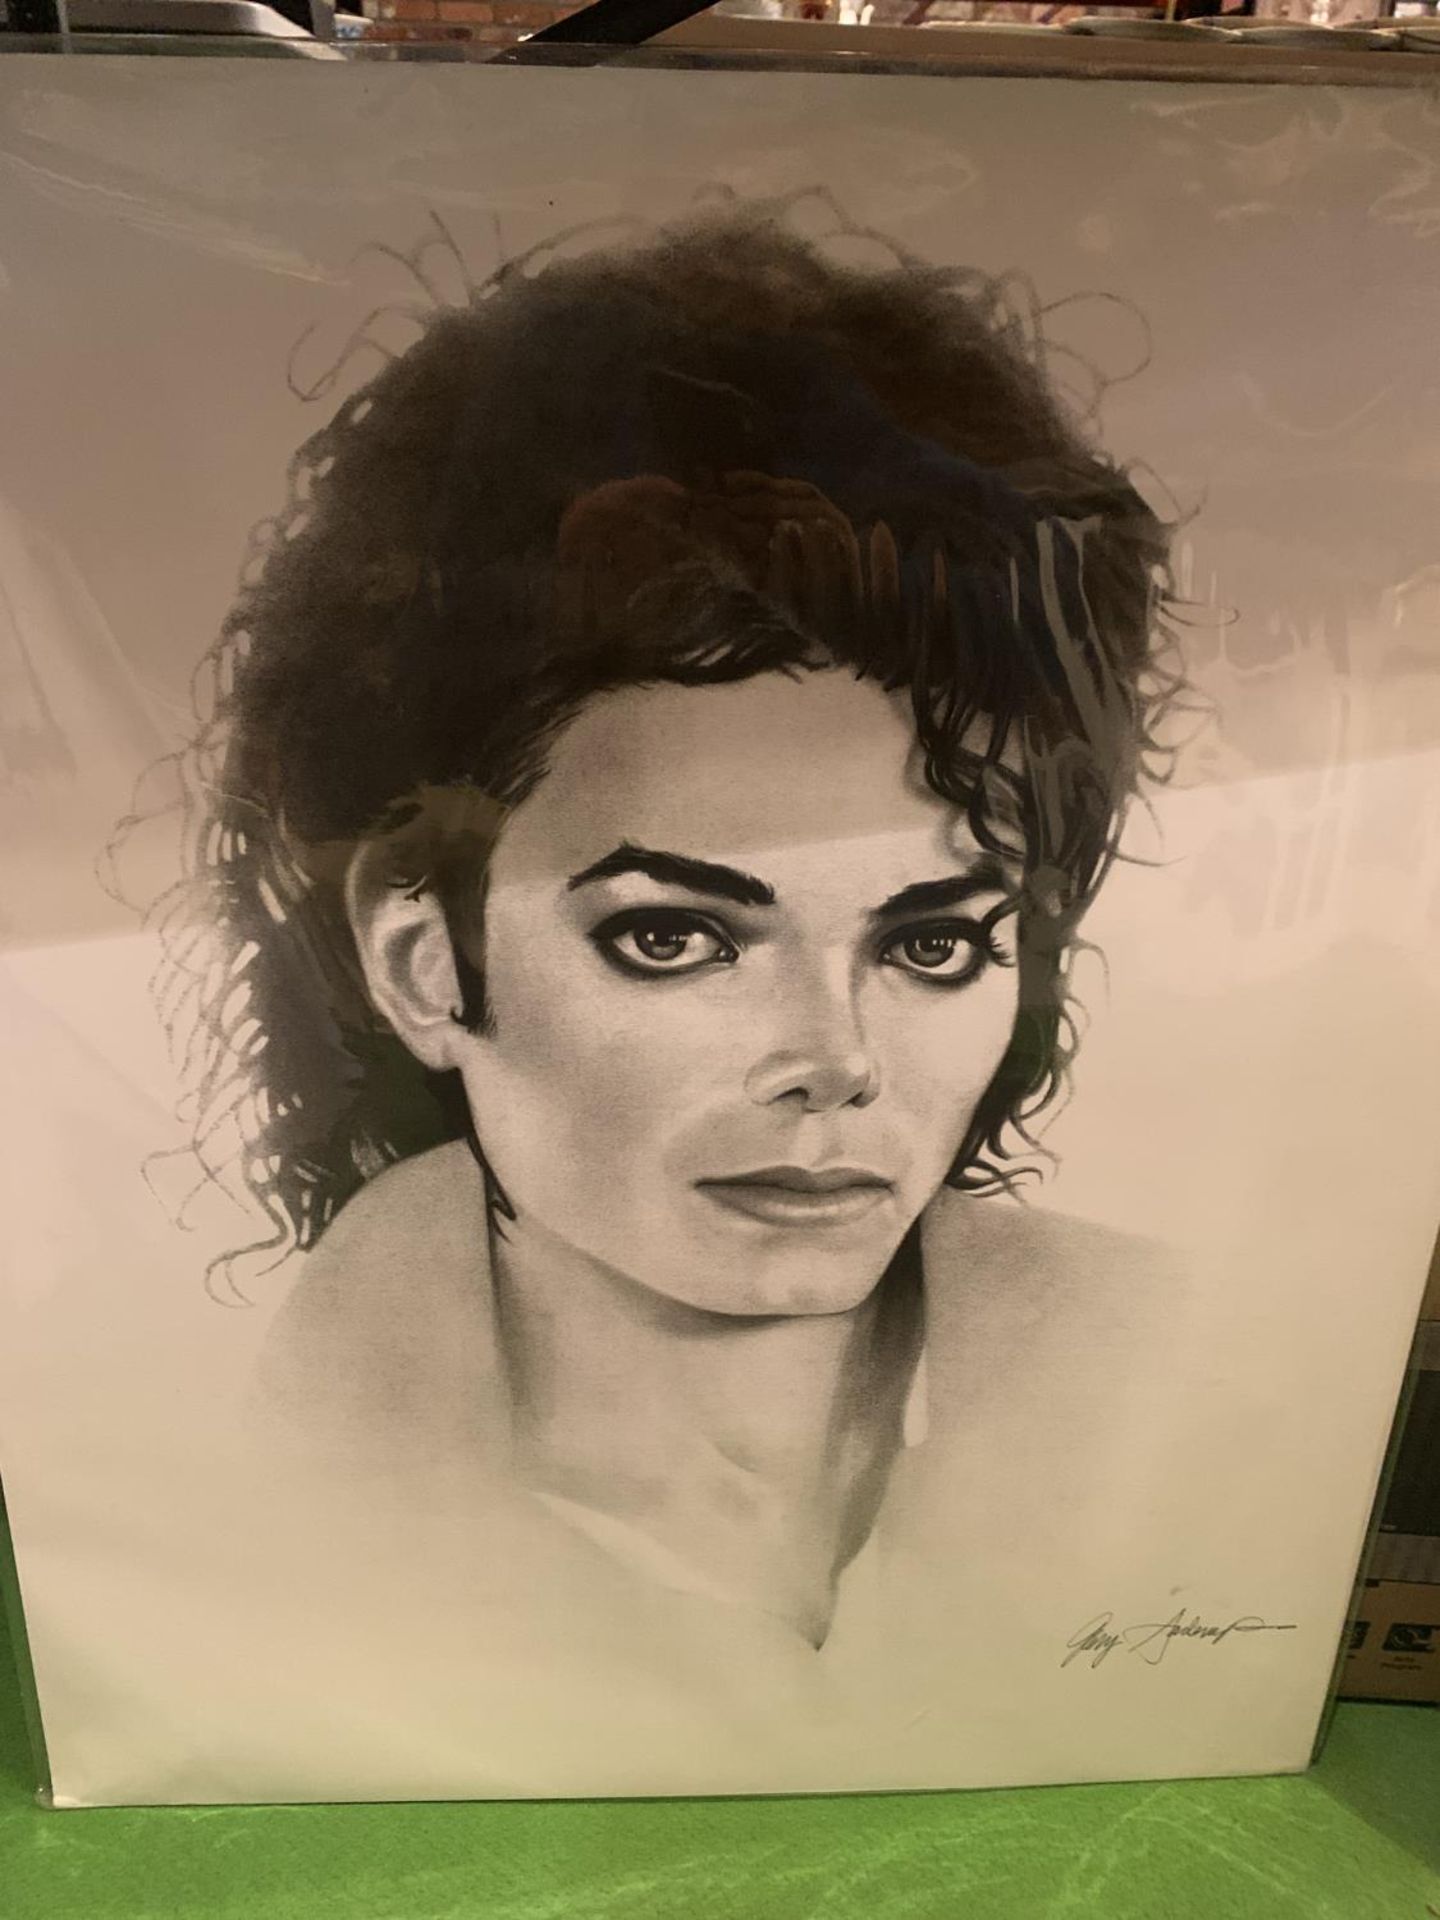 A BLACK AND WHITE SKETCH STYLE PICTURE OF MICHAEL JACKSON